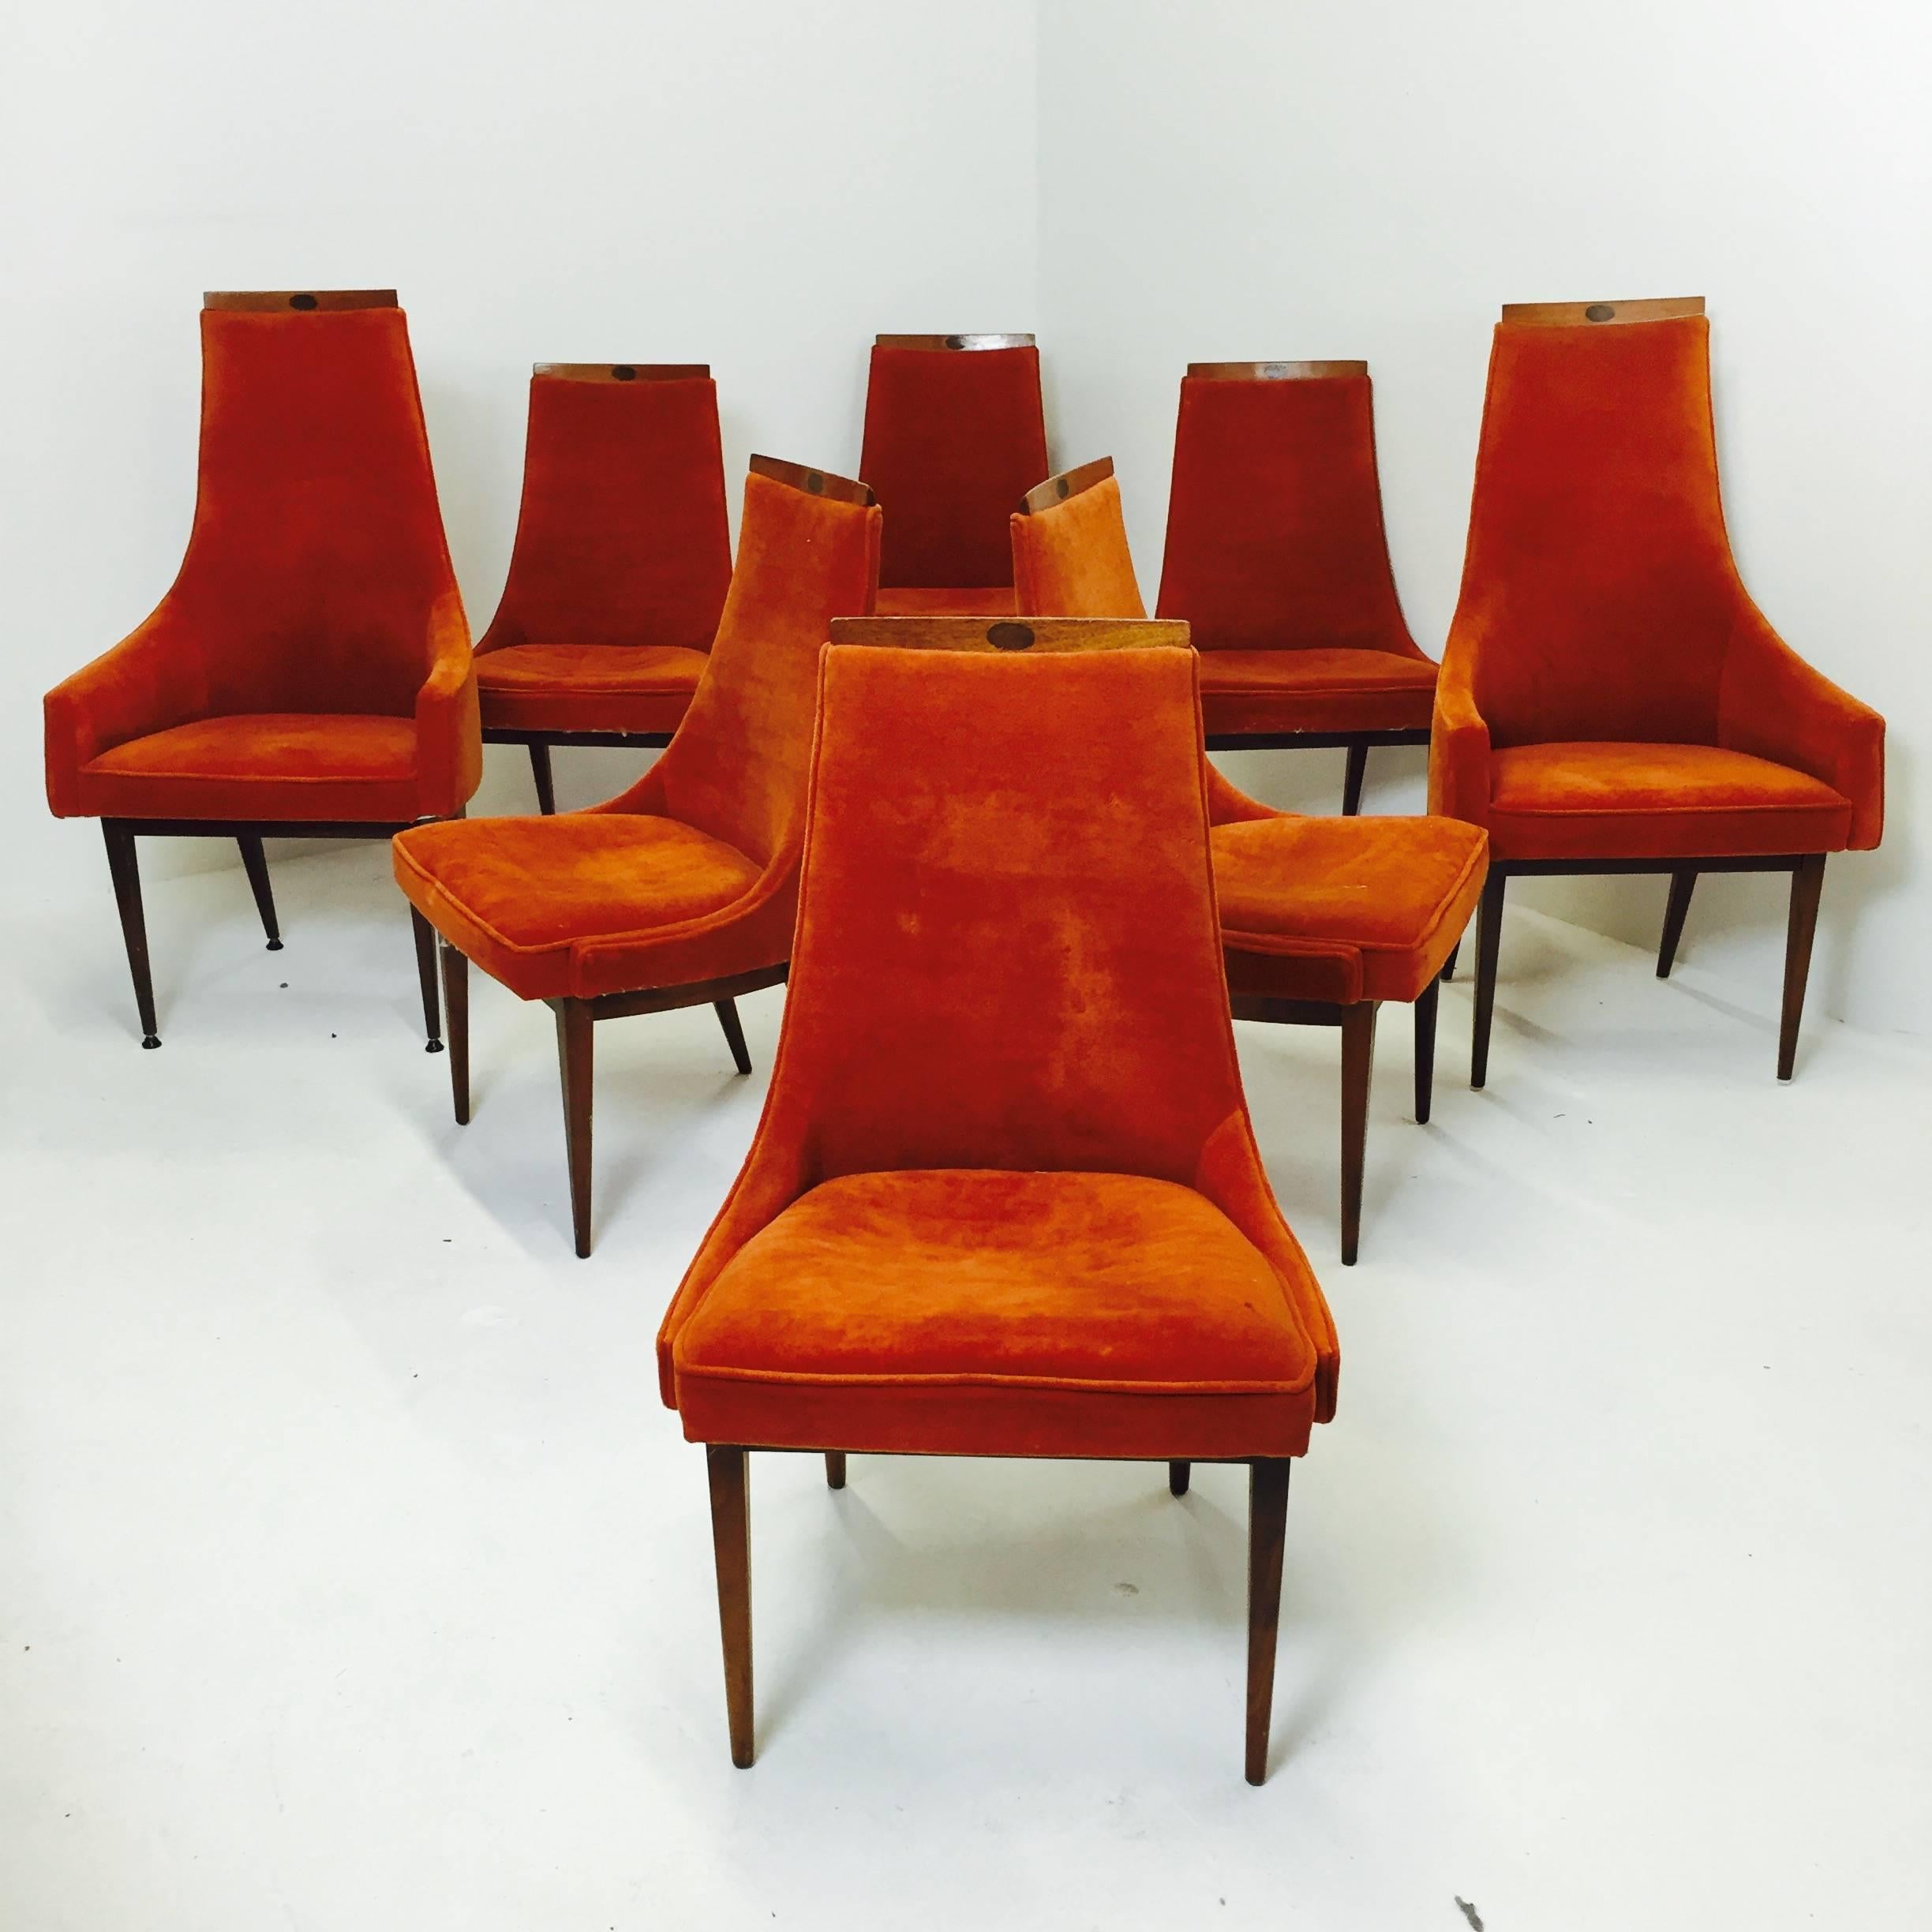 Set of eight Adrian Pearsall dining chairs in original orange vintage fabric. Needs refinishing.

Please note our separate listing for two additional armchairs.

Dimensions: 24.5